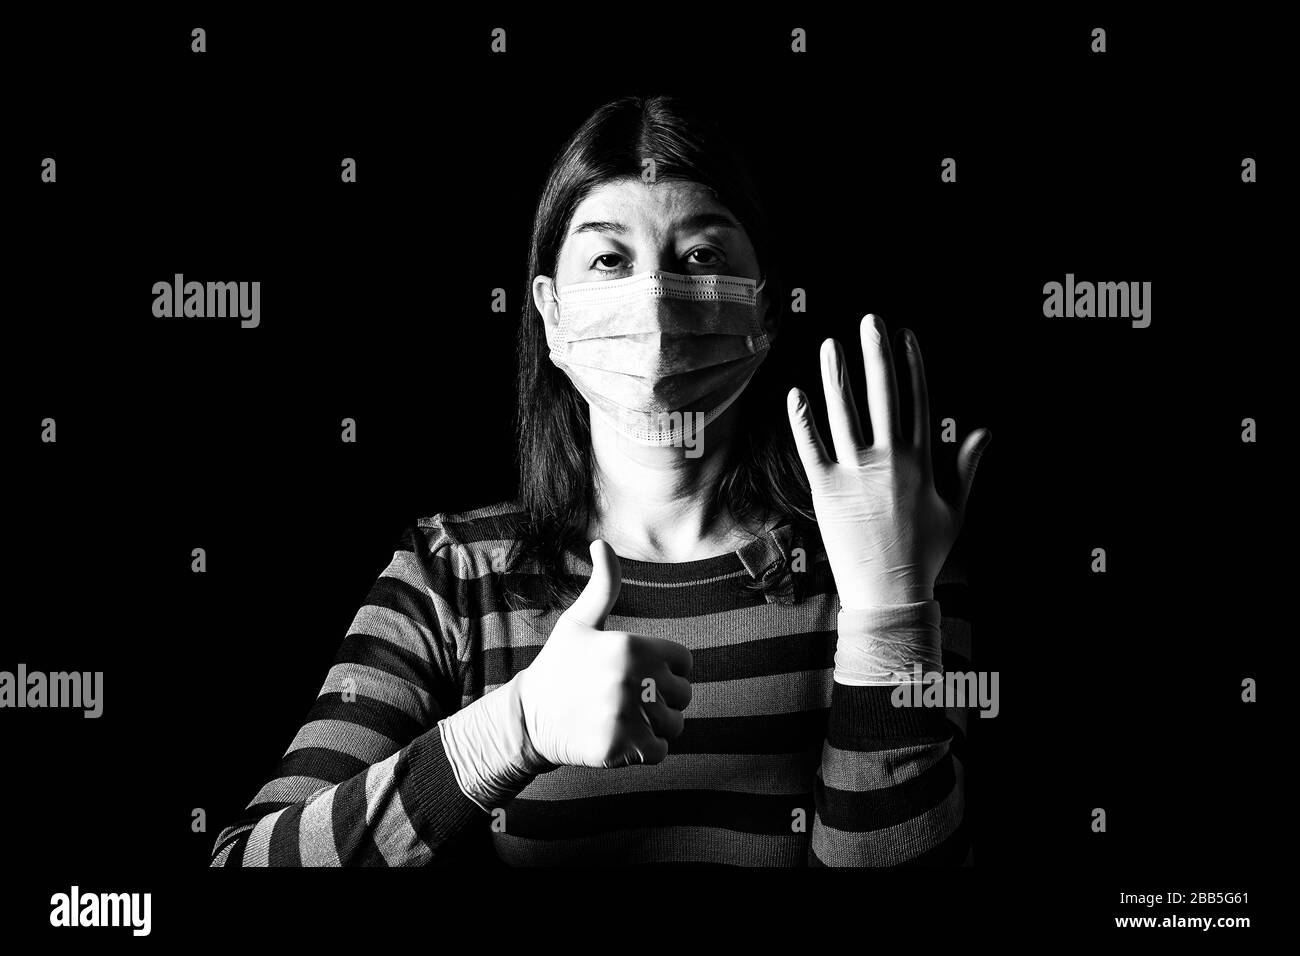 woman with surgical mask, protective gloves and thumbs up. Pandemic or epidemic, scary, fear or danger concept. Protection for biohazard like COVID-19 Stock Photo